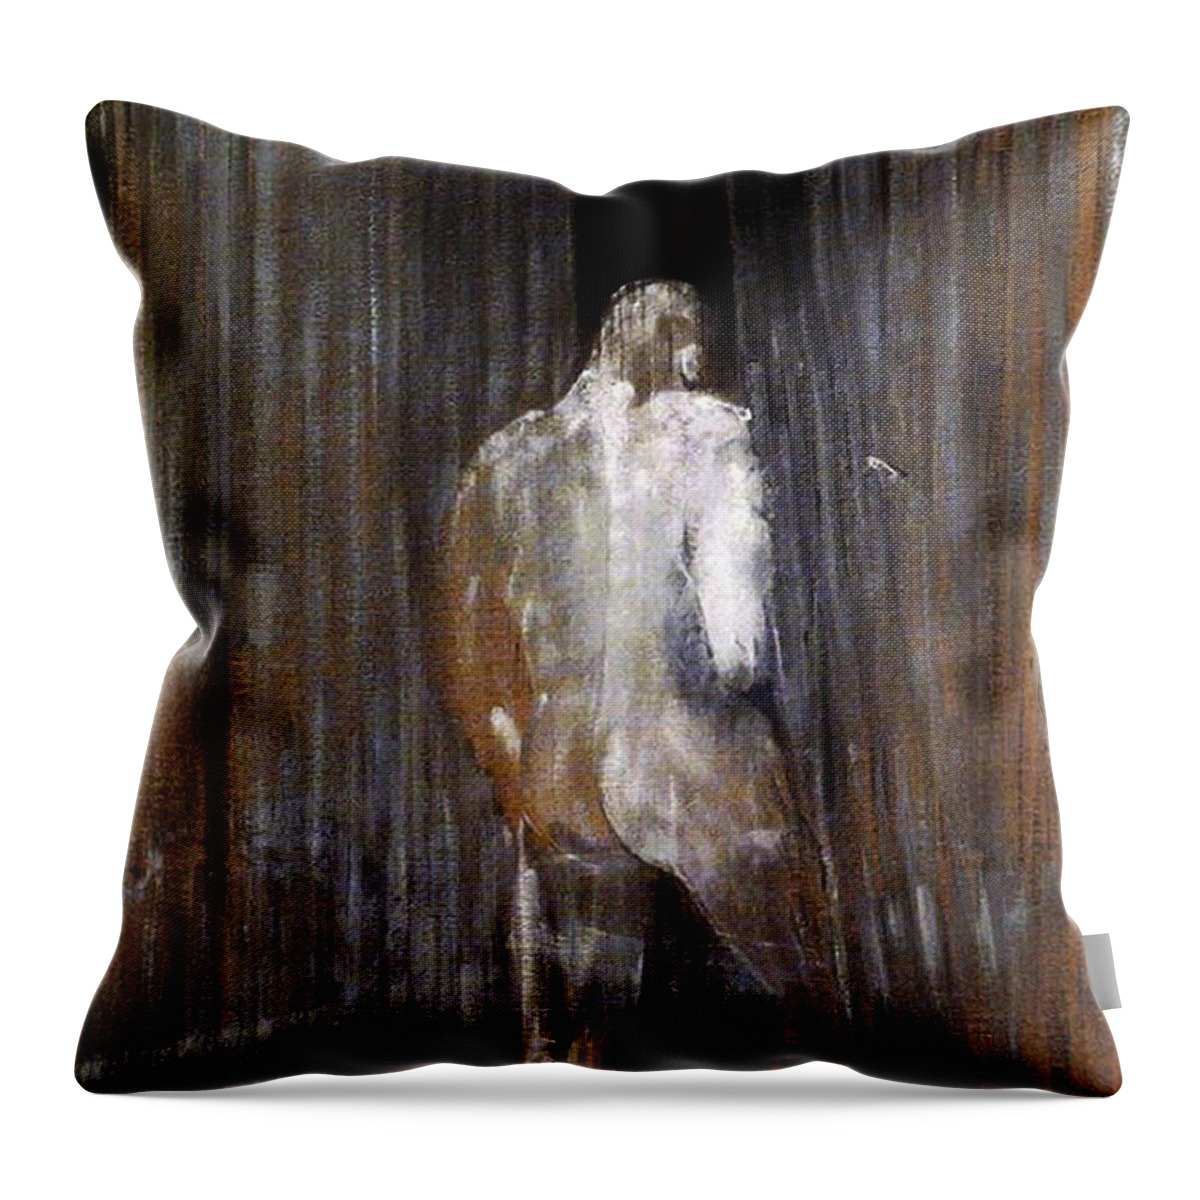 Human Form Throw Pillow featuring the painting Human Form by Francis Bacon